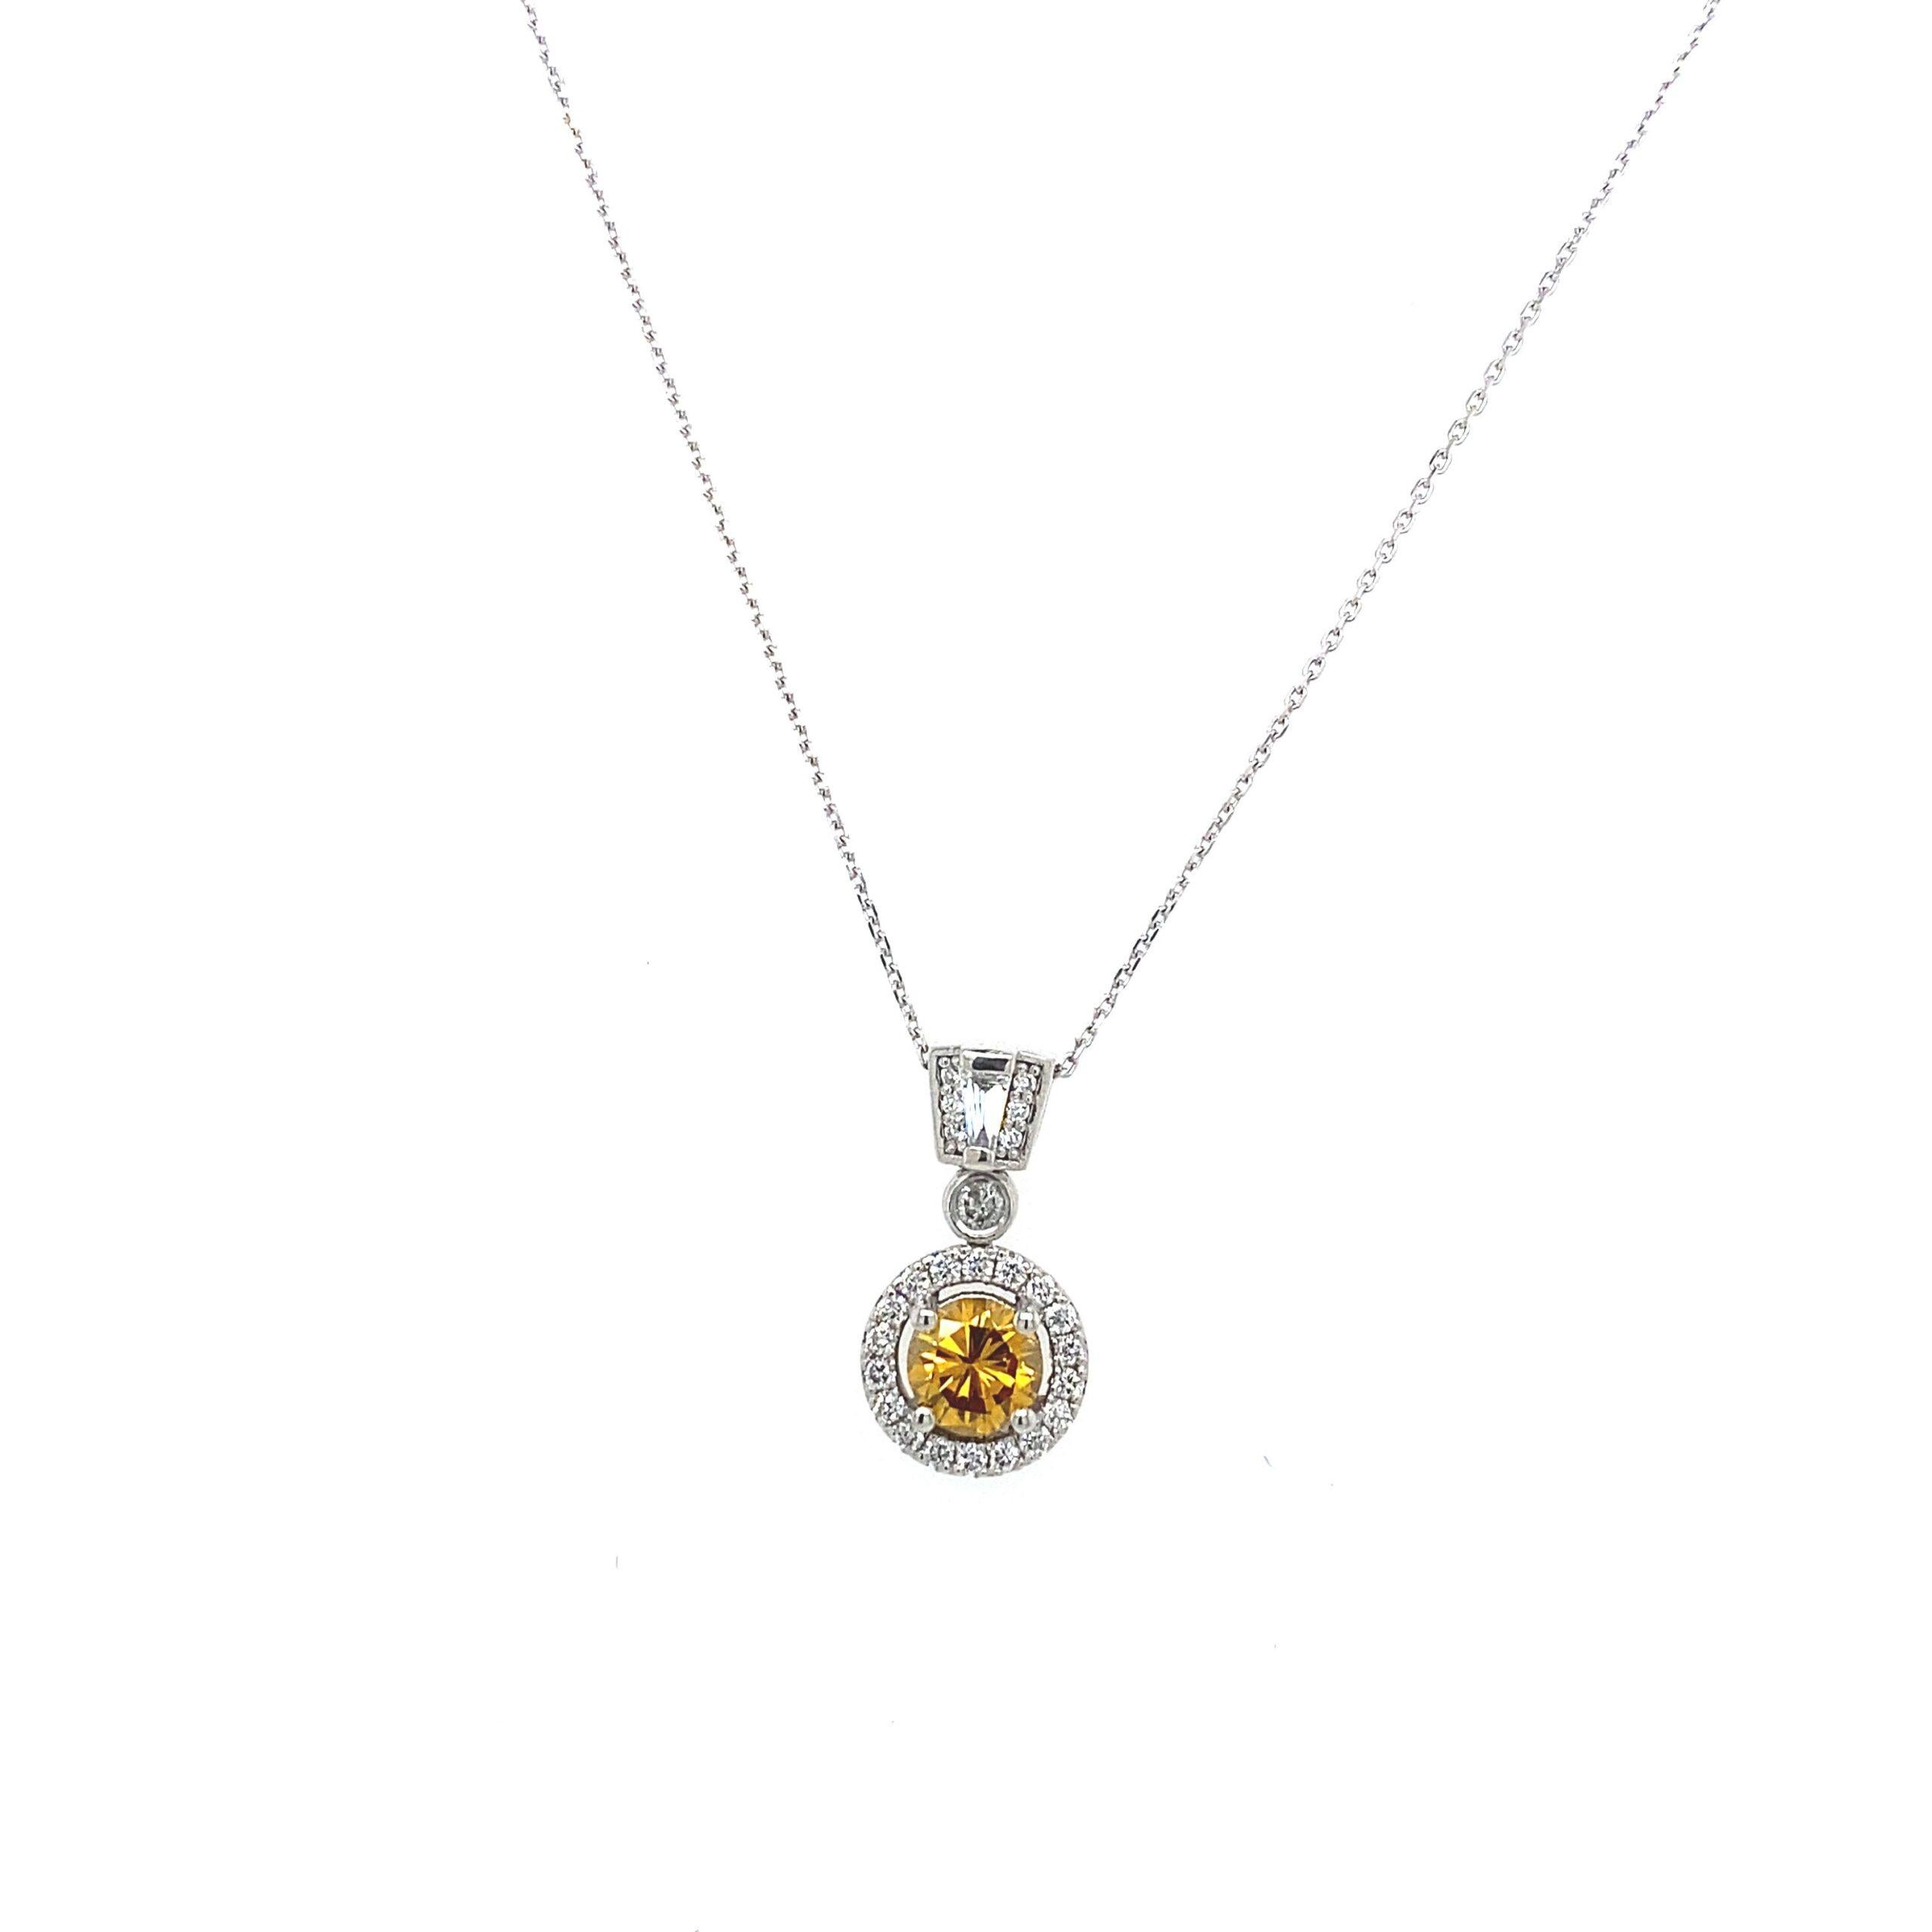 0.55ct Natural Orange Diamond and Platinum Pendant with White Diamonds TDW 1.0ct

Surrounded by 0.45ct of White Diamonds. Round Brilliant Cut Diamonds and One Tapered Baguette. Suspended on a Platinum Trace Chain with a Lobster Clasp.

Additional